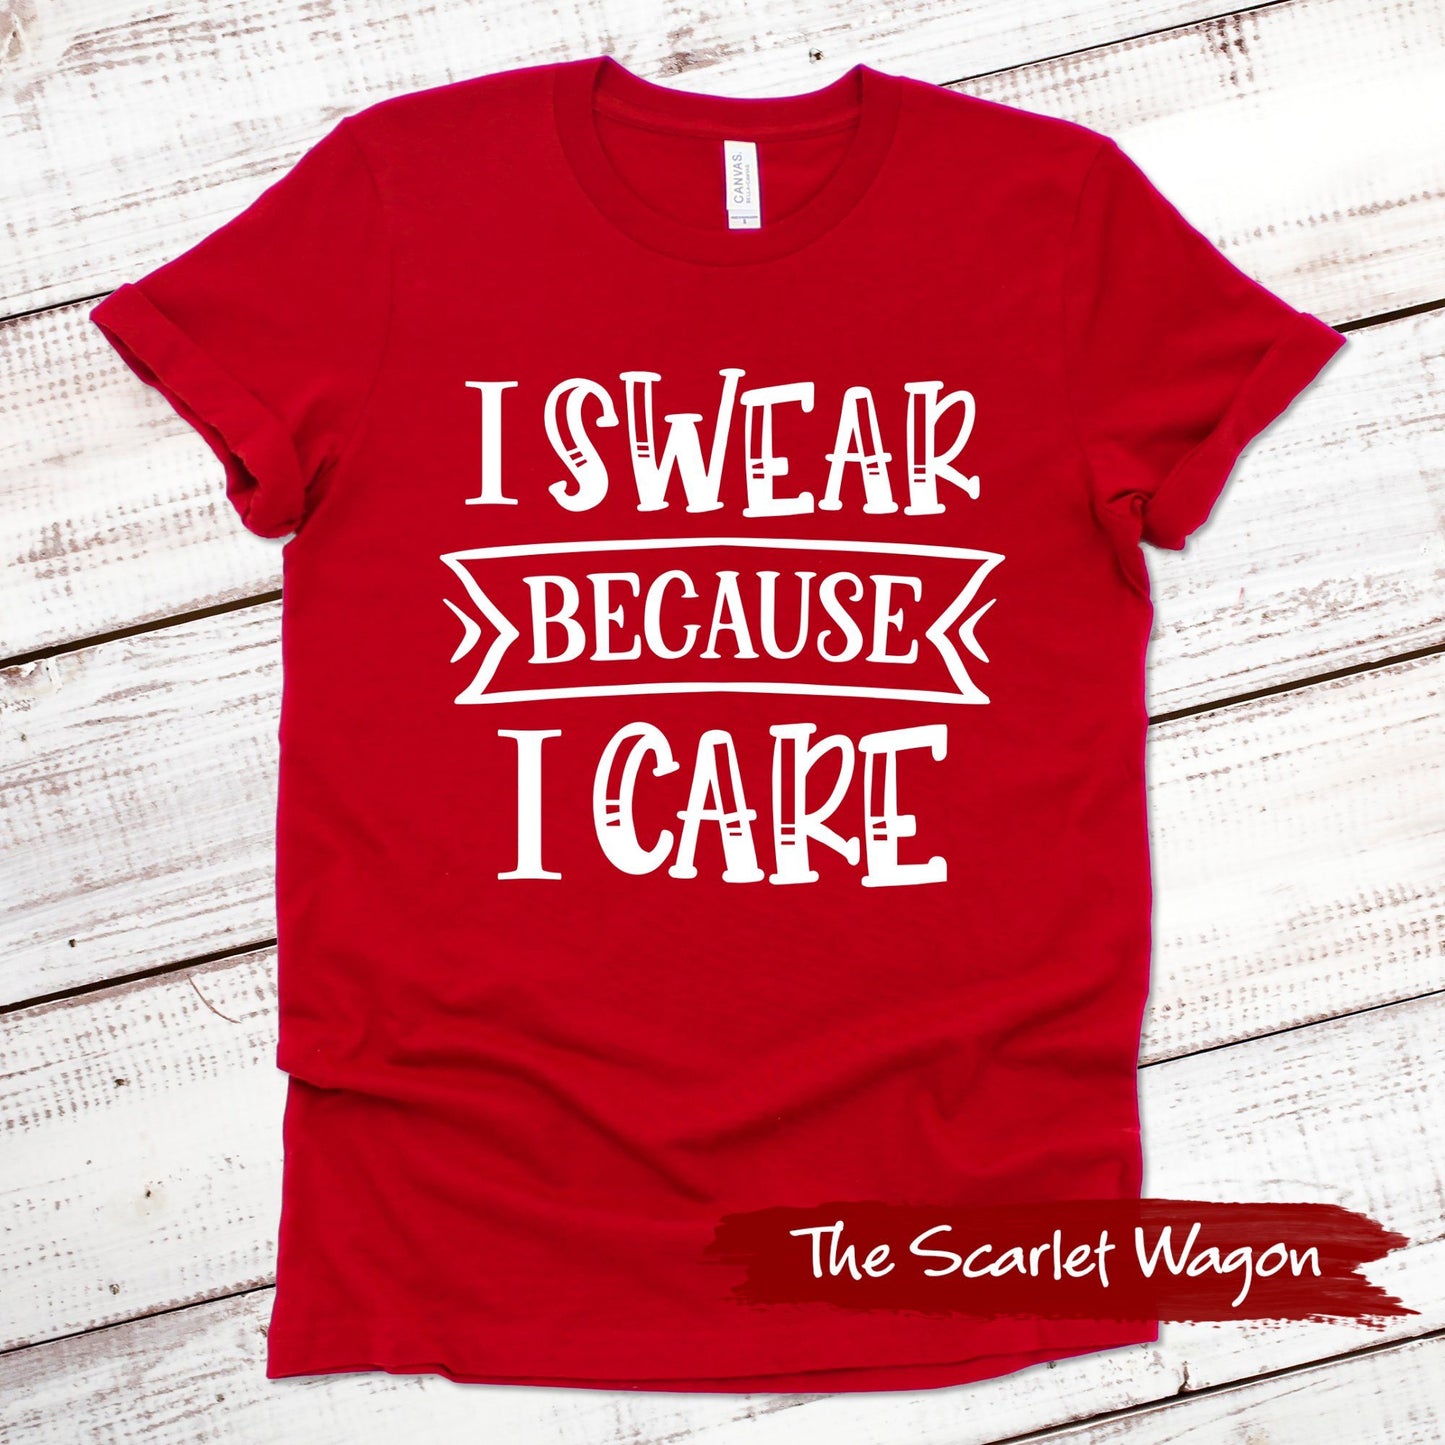 I Swear Because I Care Funny Shirt Scarlet Wagon Red XS 